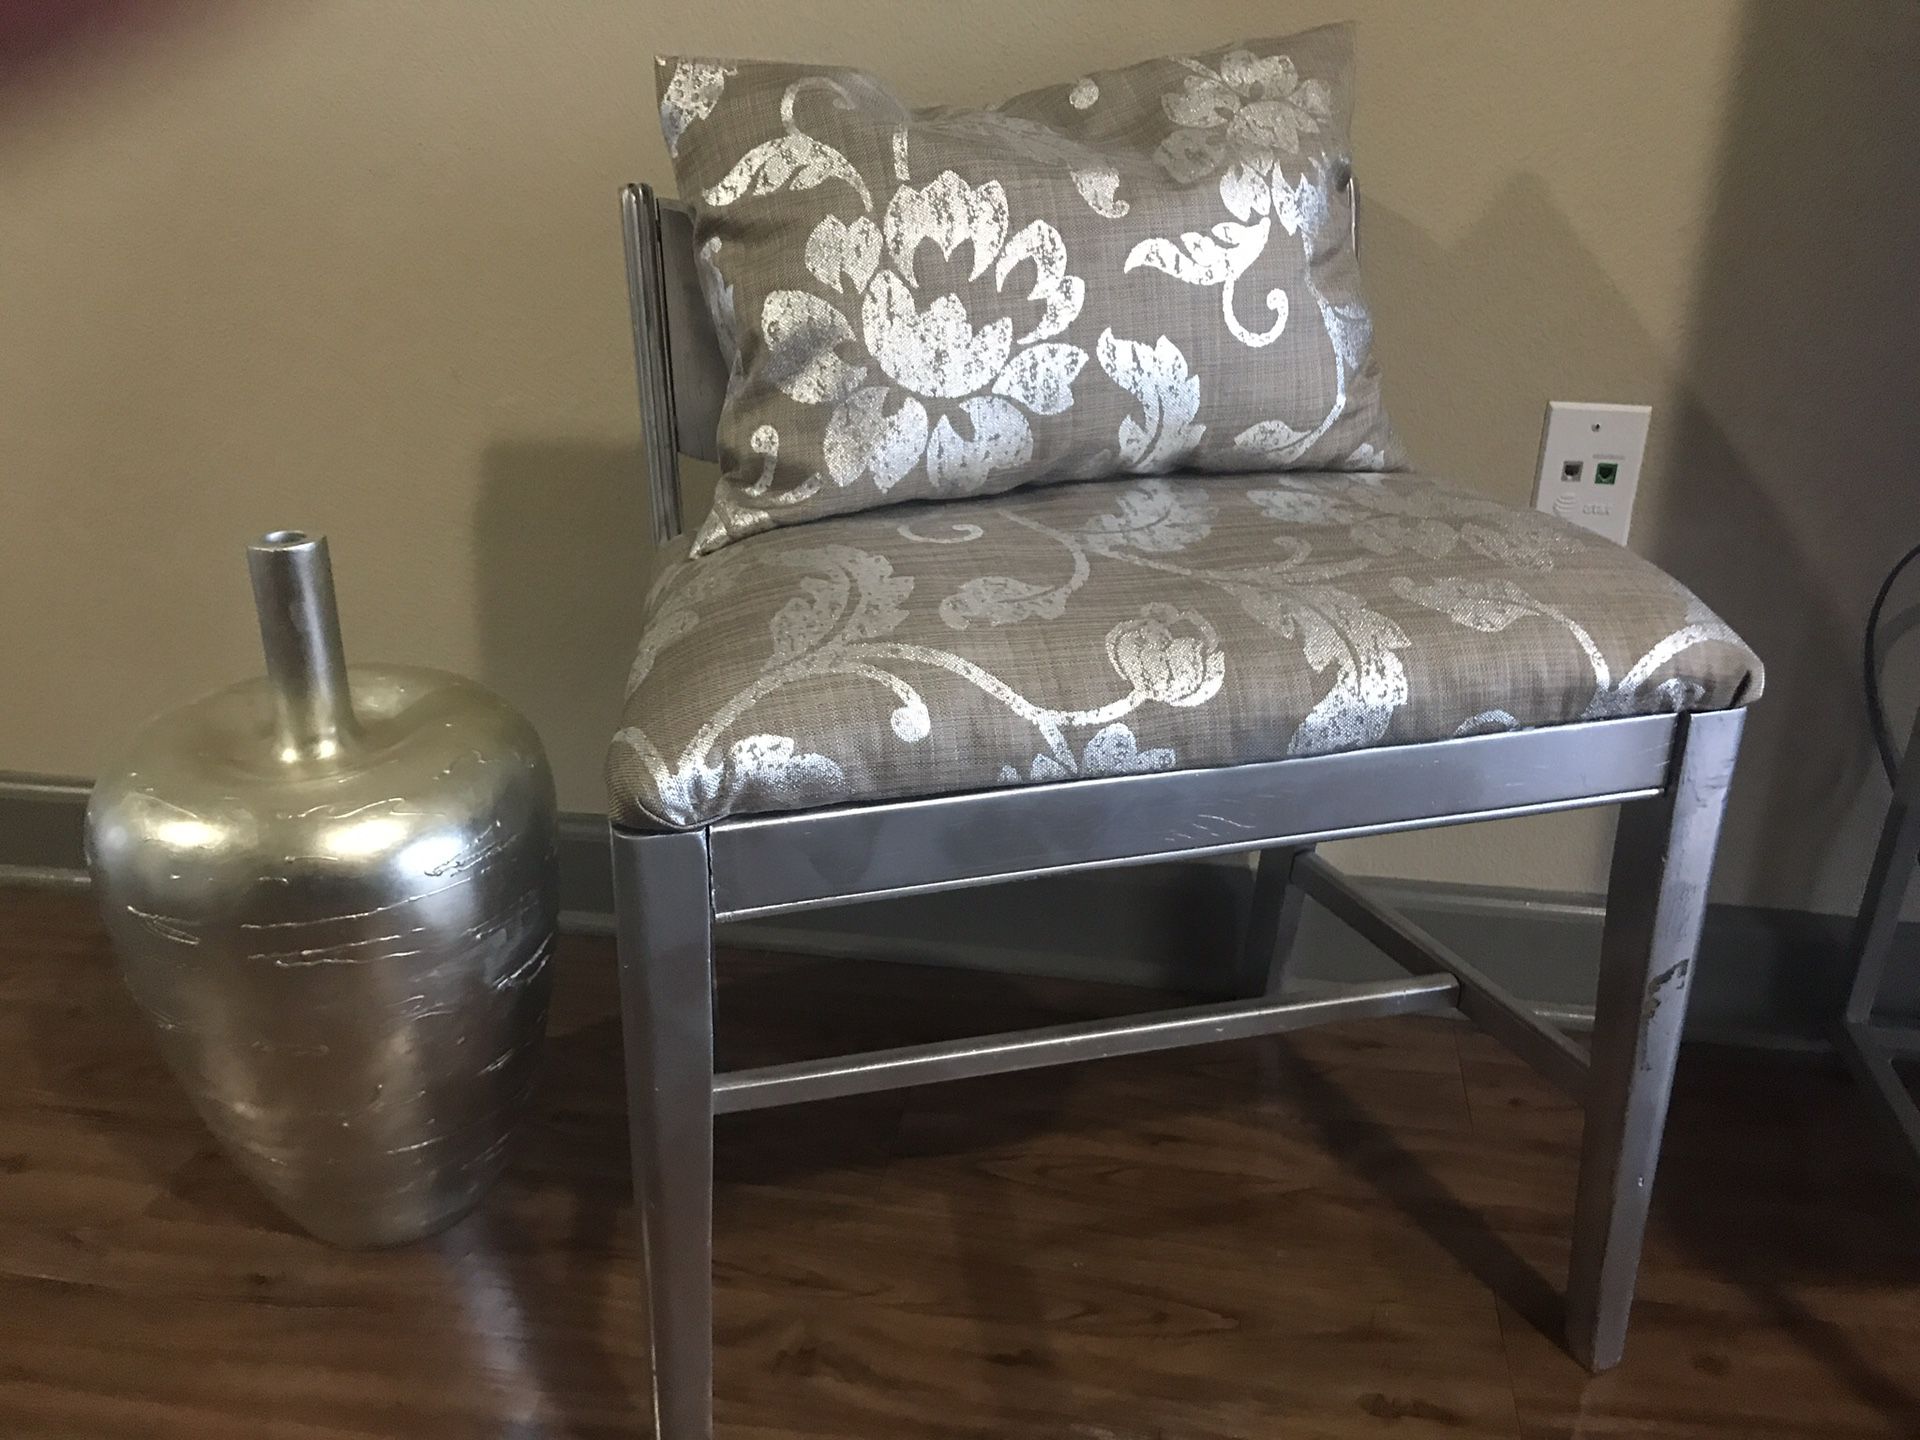 Estate Sell. Everything must go. Contemporary Chair and Vase. Best a Offer